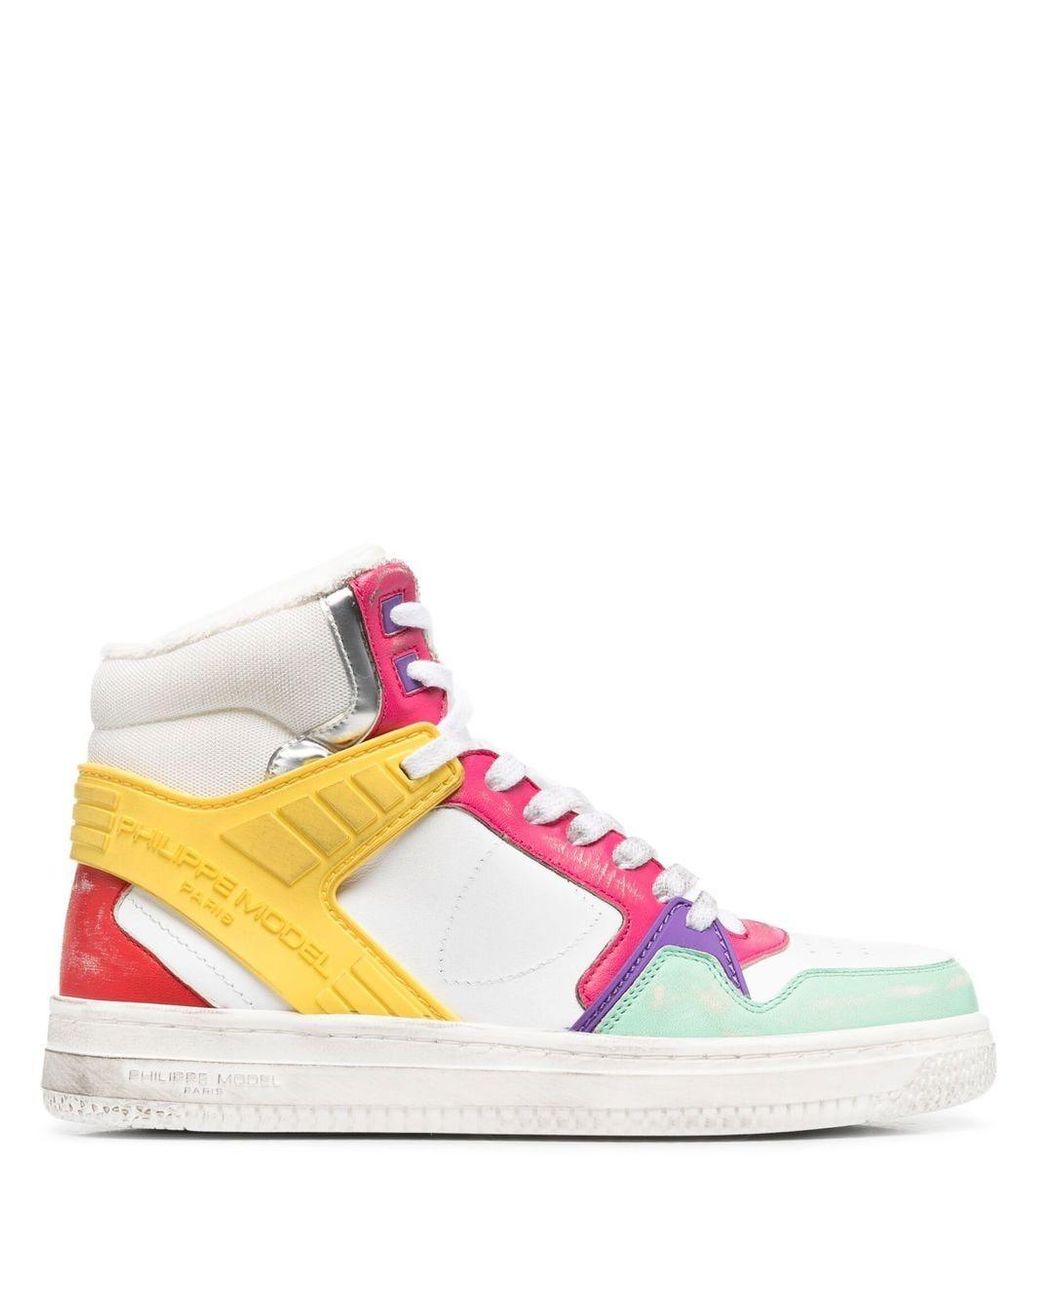 Philippe Model Paris Colour-blocked Leather Hi-top Sneakers in Pink | Lyst  Canada